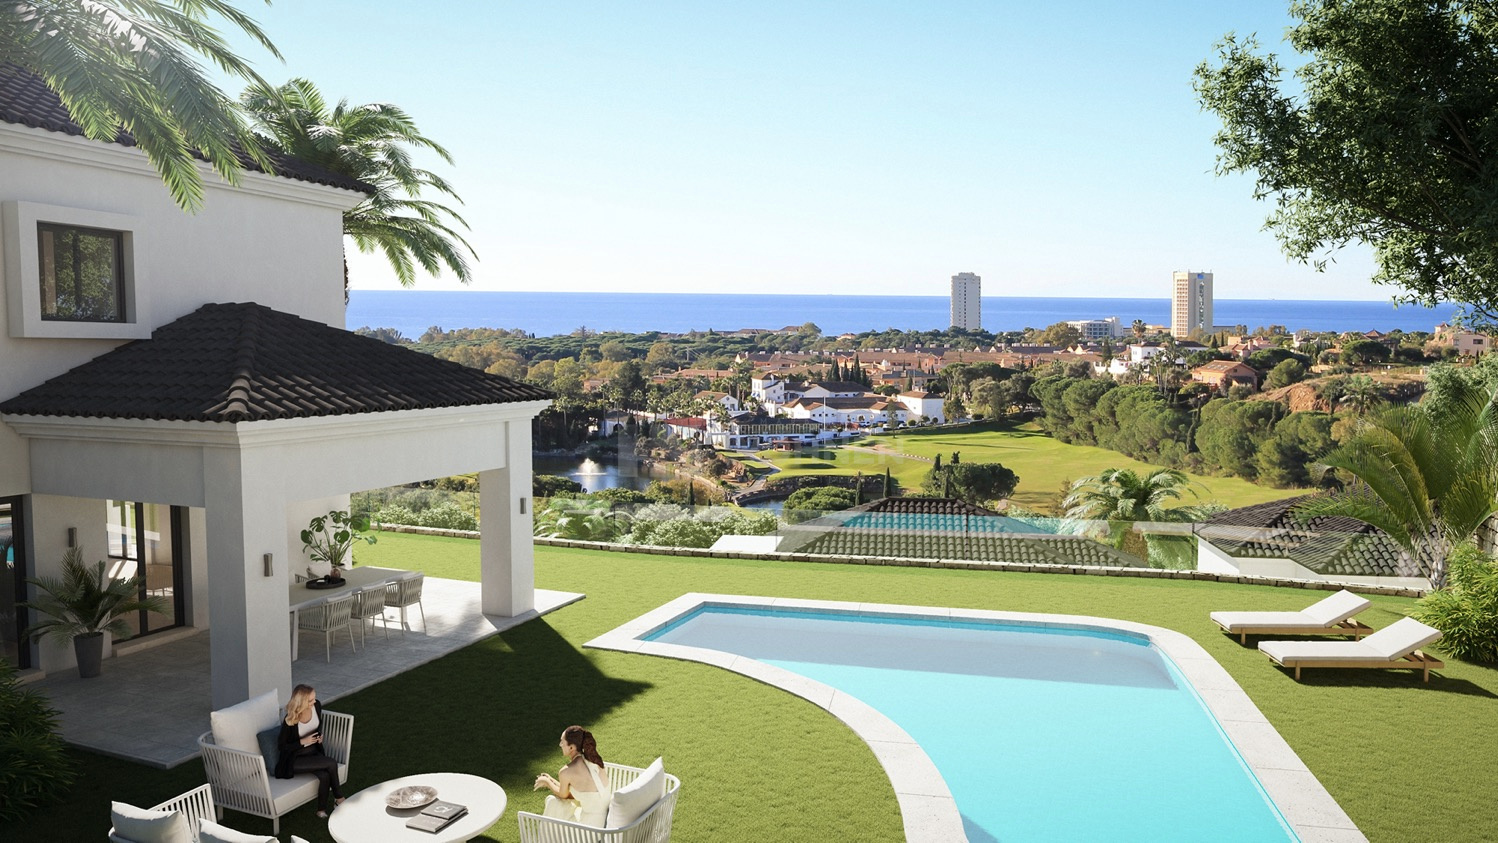 Detached villas and semi-detached houses with golf and ocean views